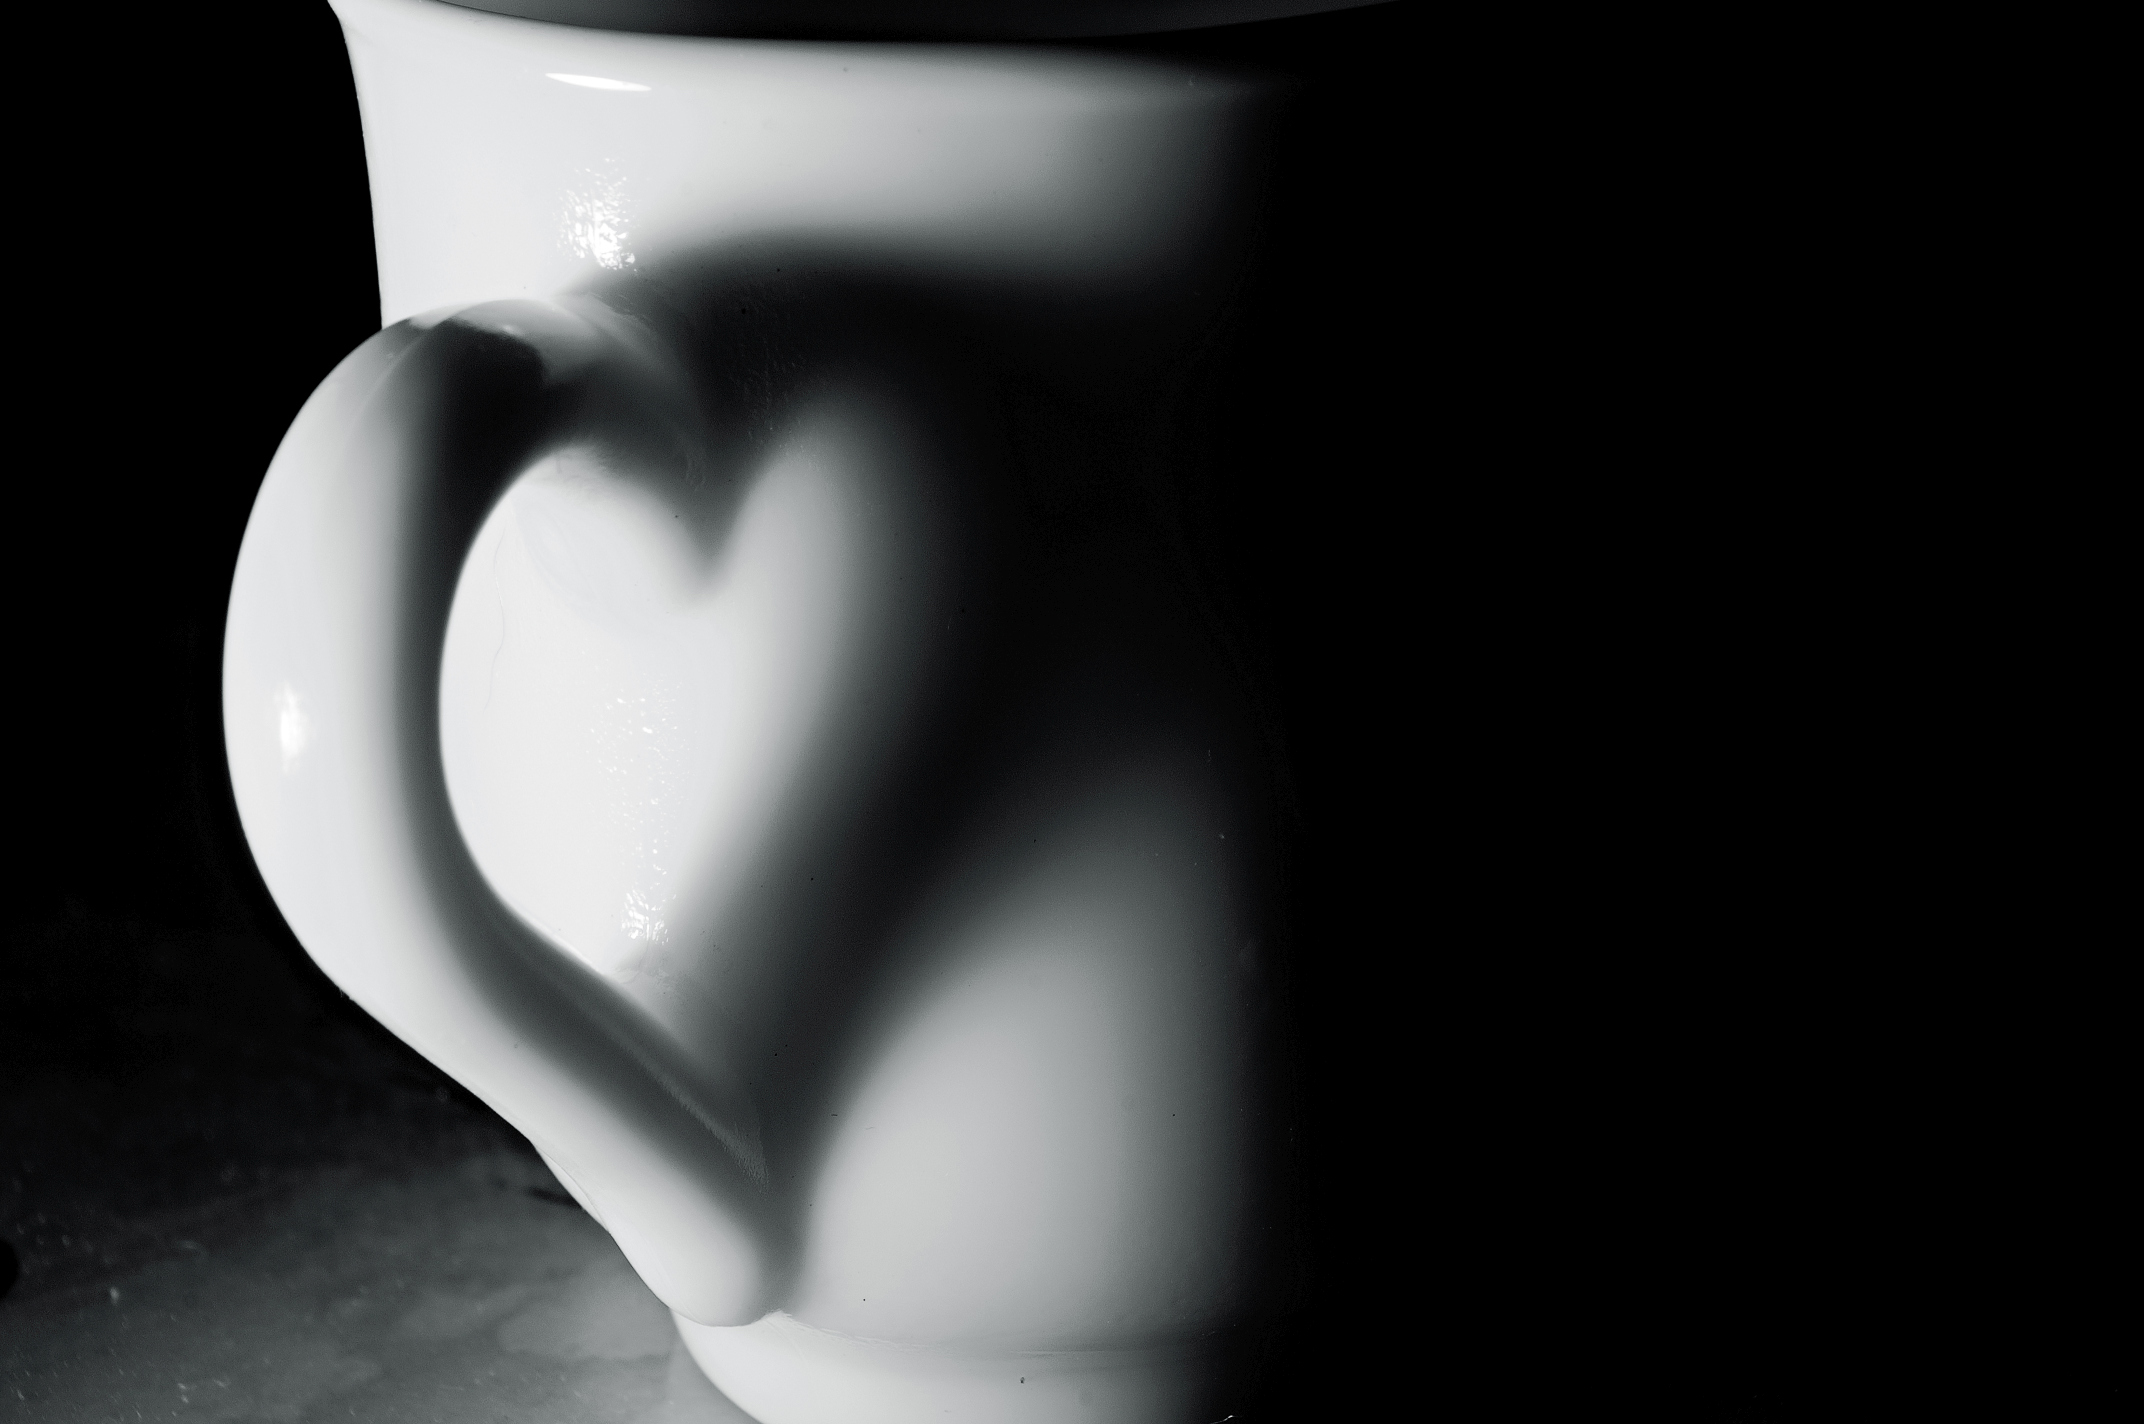 A cup with love